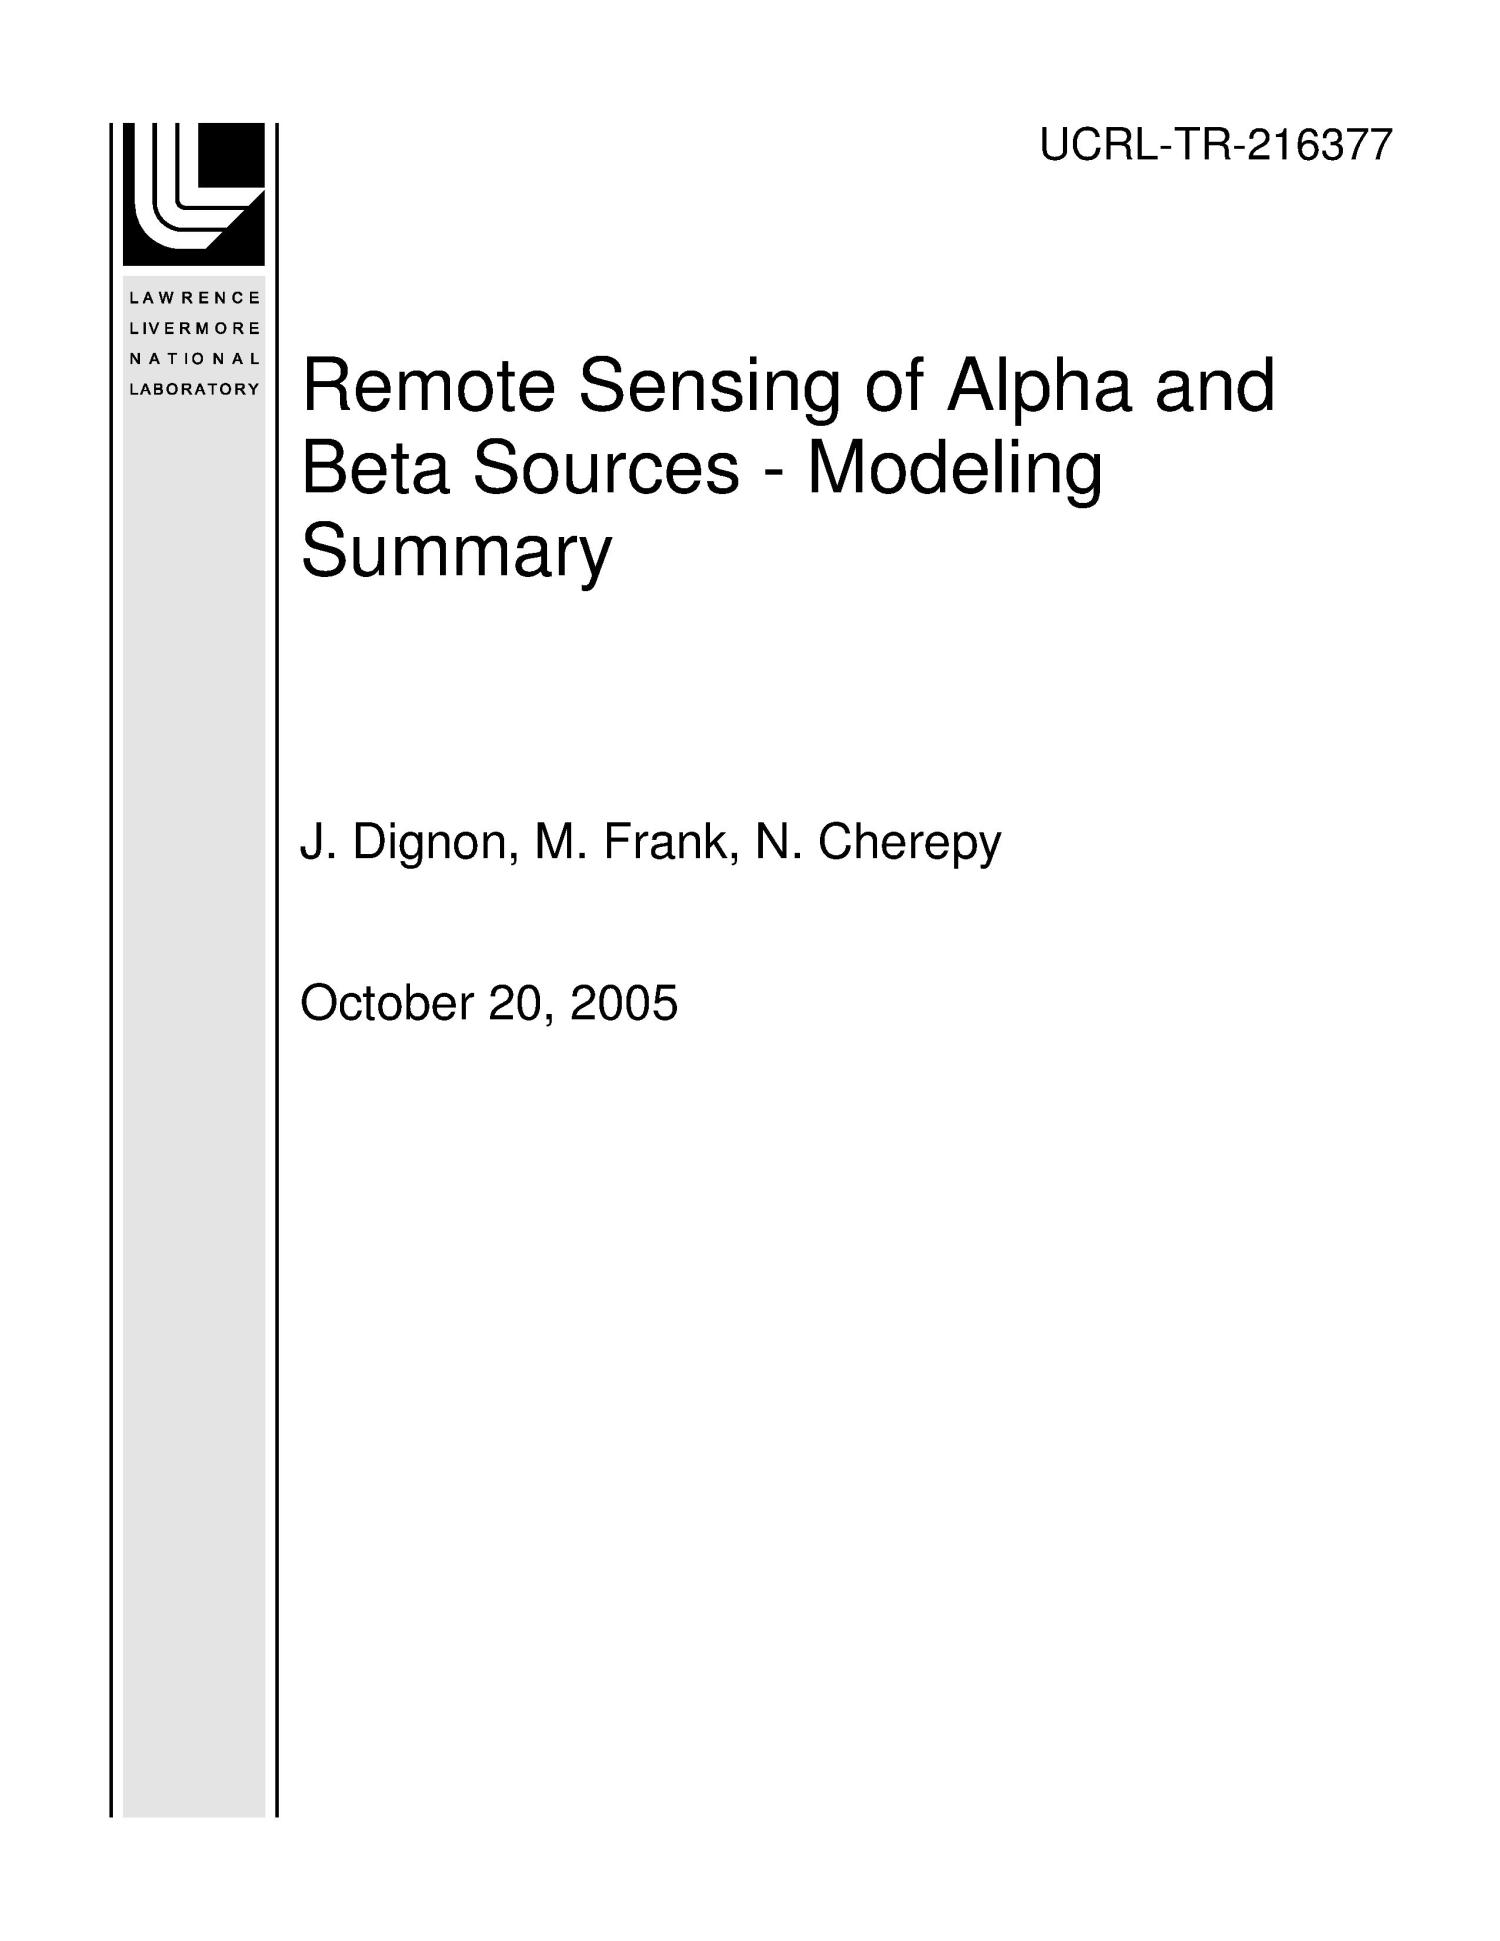 Remote Sensing of Alpha and Beta Sources - Modeling Summary
                                                
                                                    [Sequence #]: 1 of 13
                                                